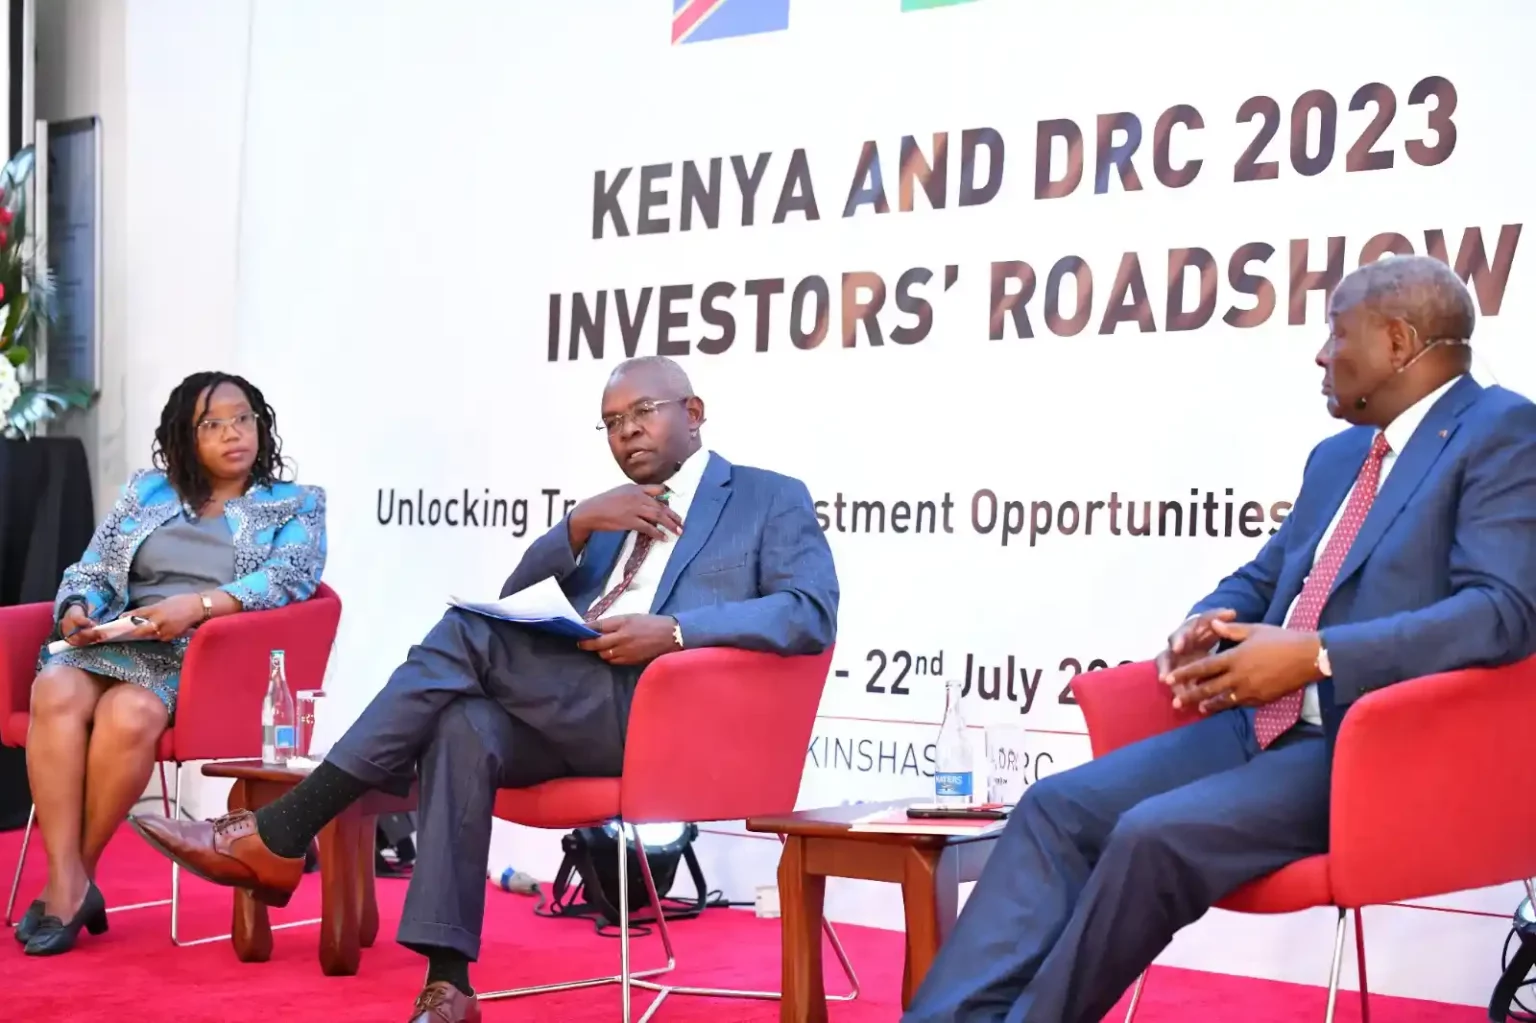 Ms Karen Kandie, director of Parastatals Reforms at the Treasury, Dr Kamau Thugge CBK Governor, and Equity Group Managing director and CEO James Mwangi during the launch of the 5-day roadshow in DRC.